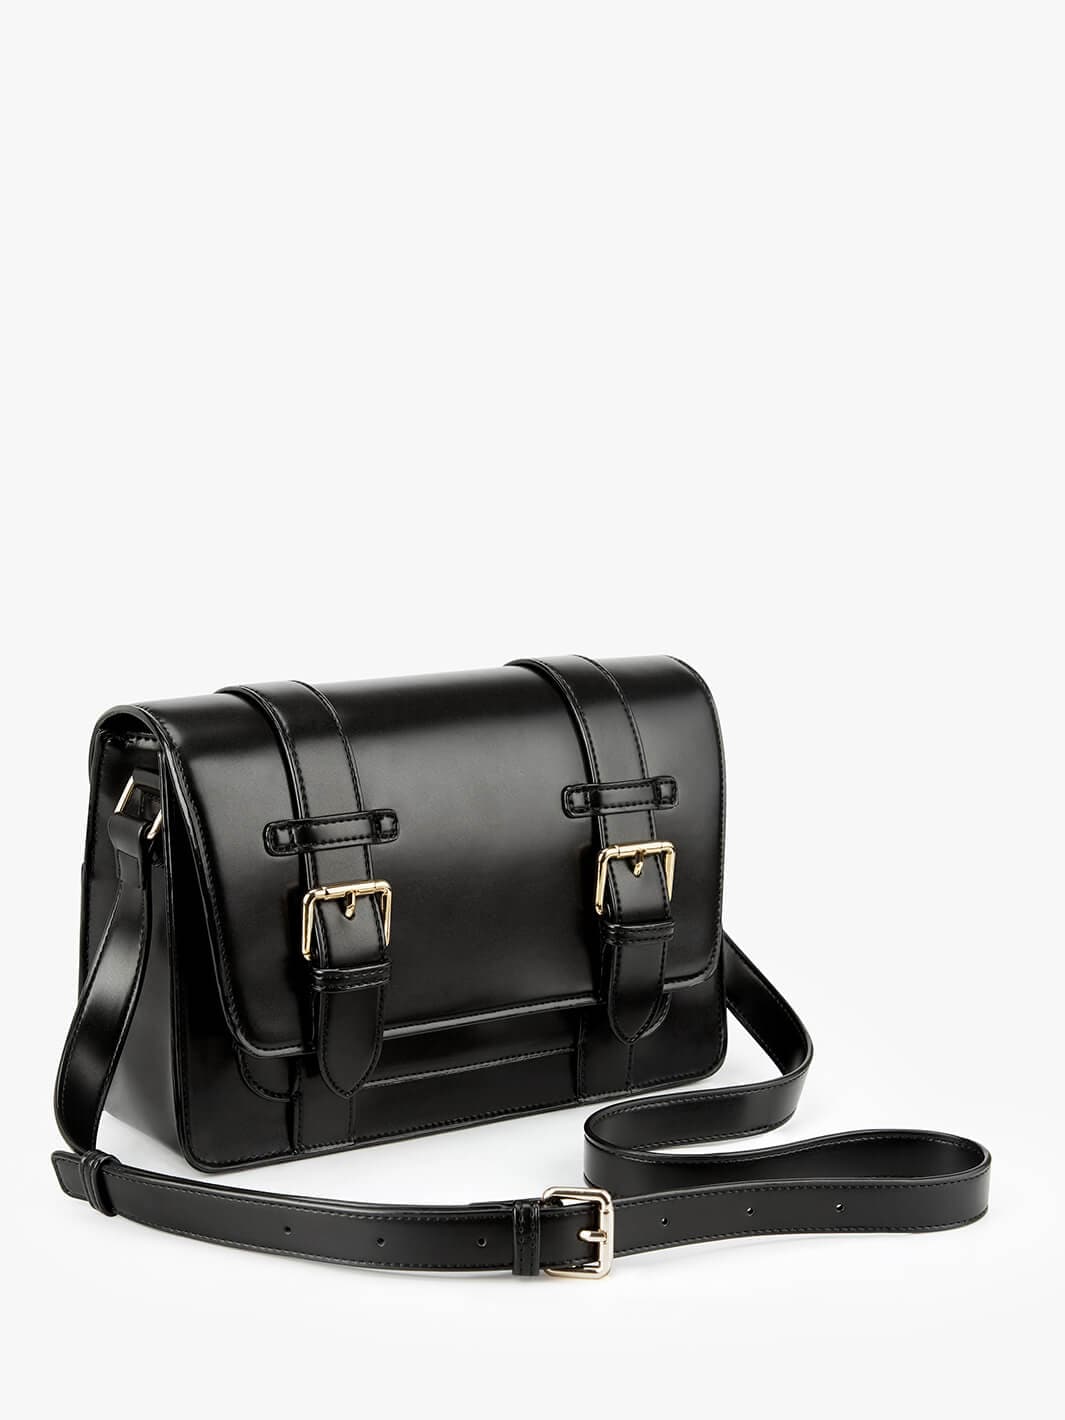 Best Crossbody Bags for Vintage Beauty